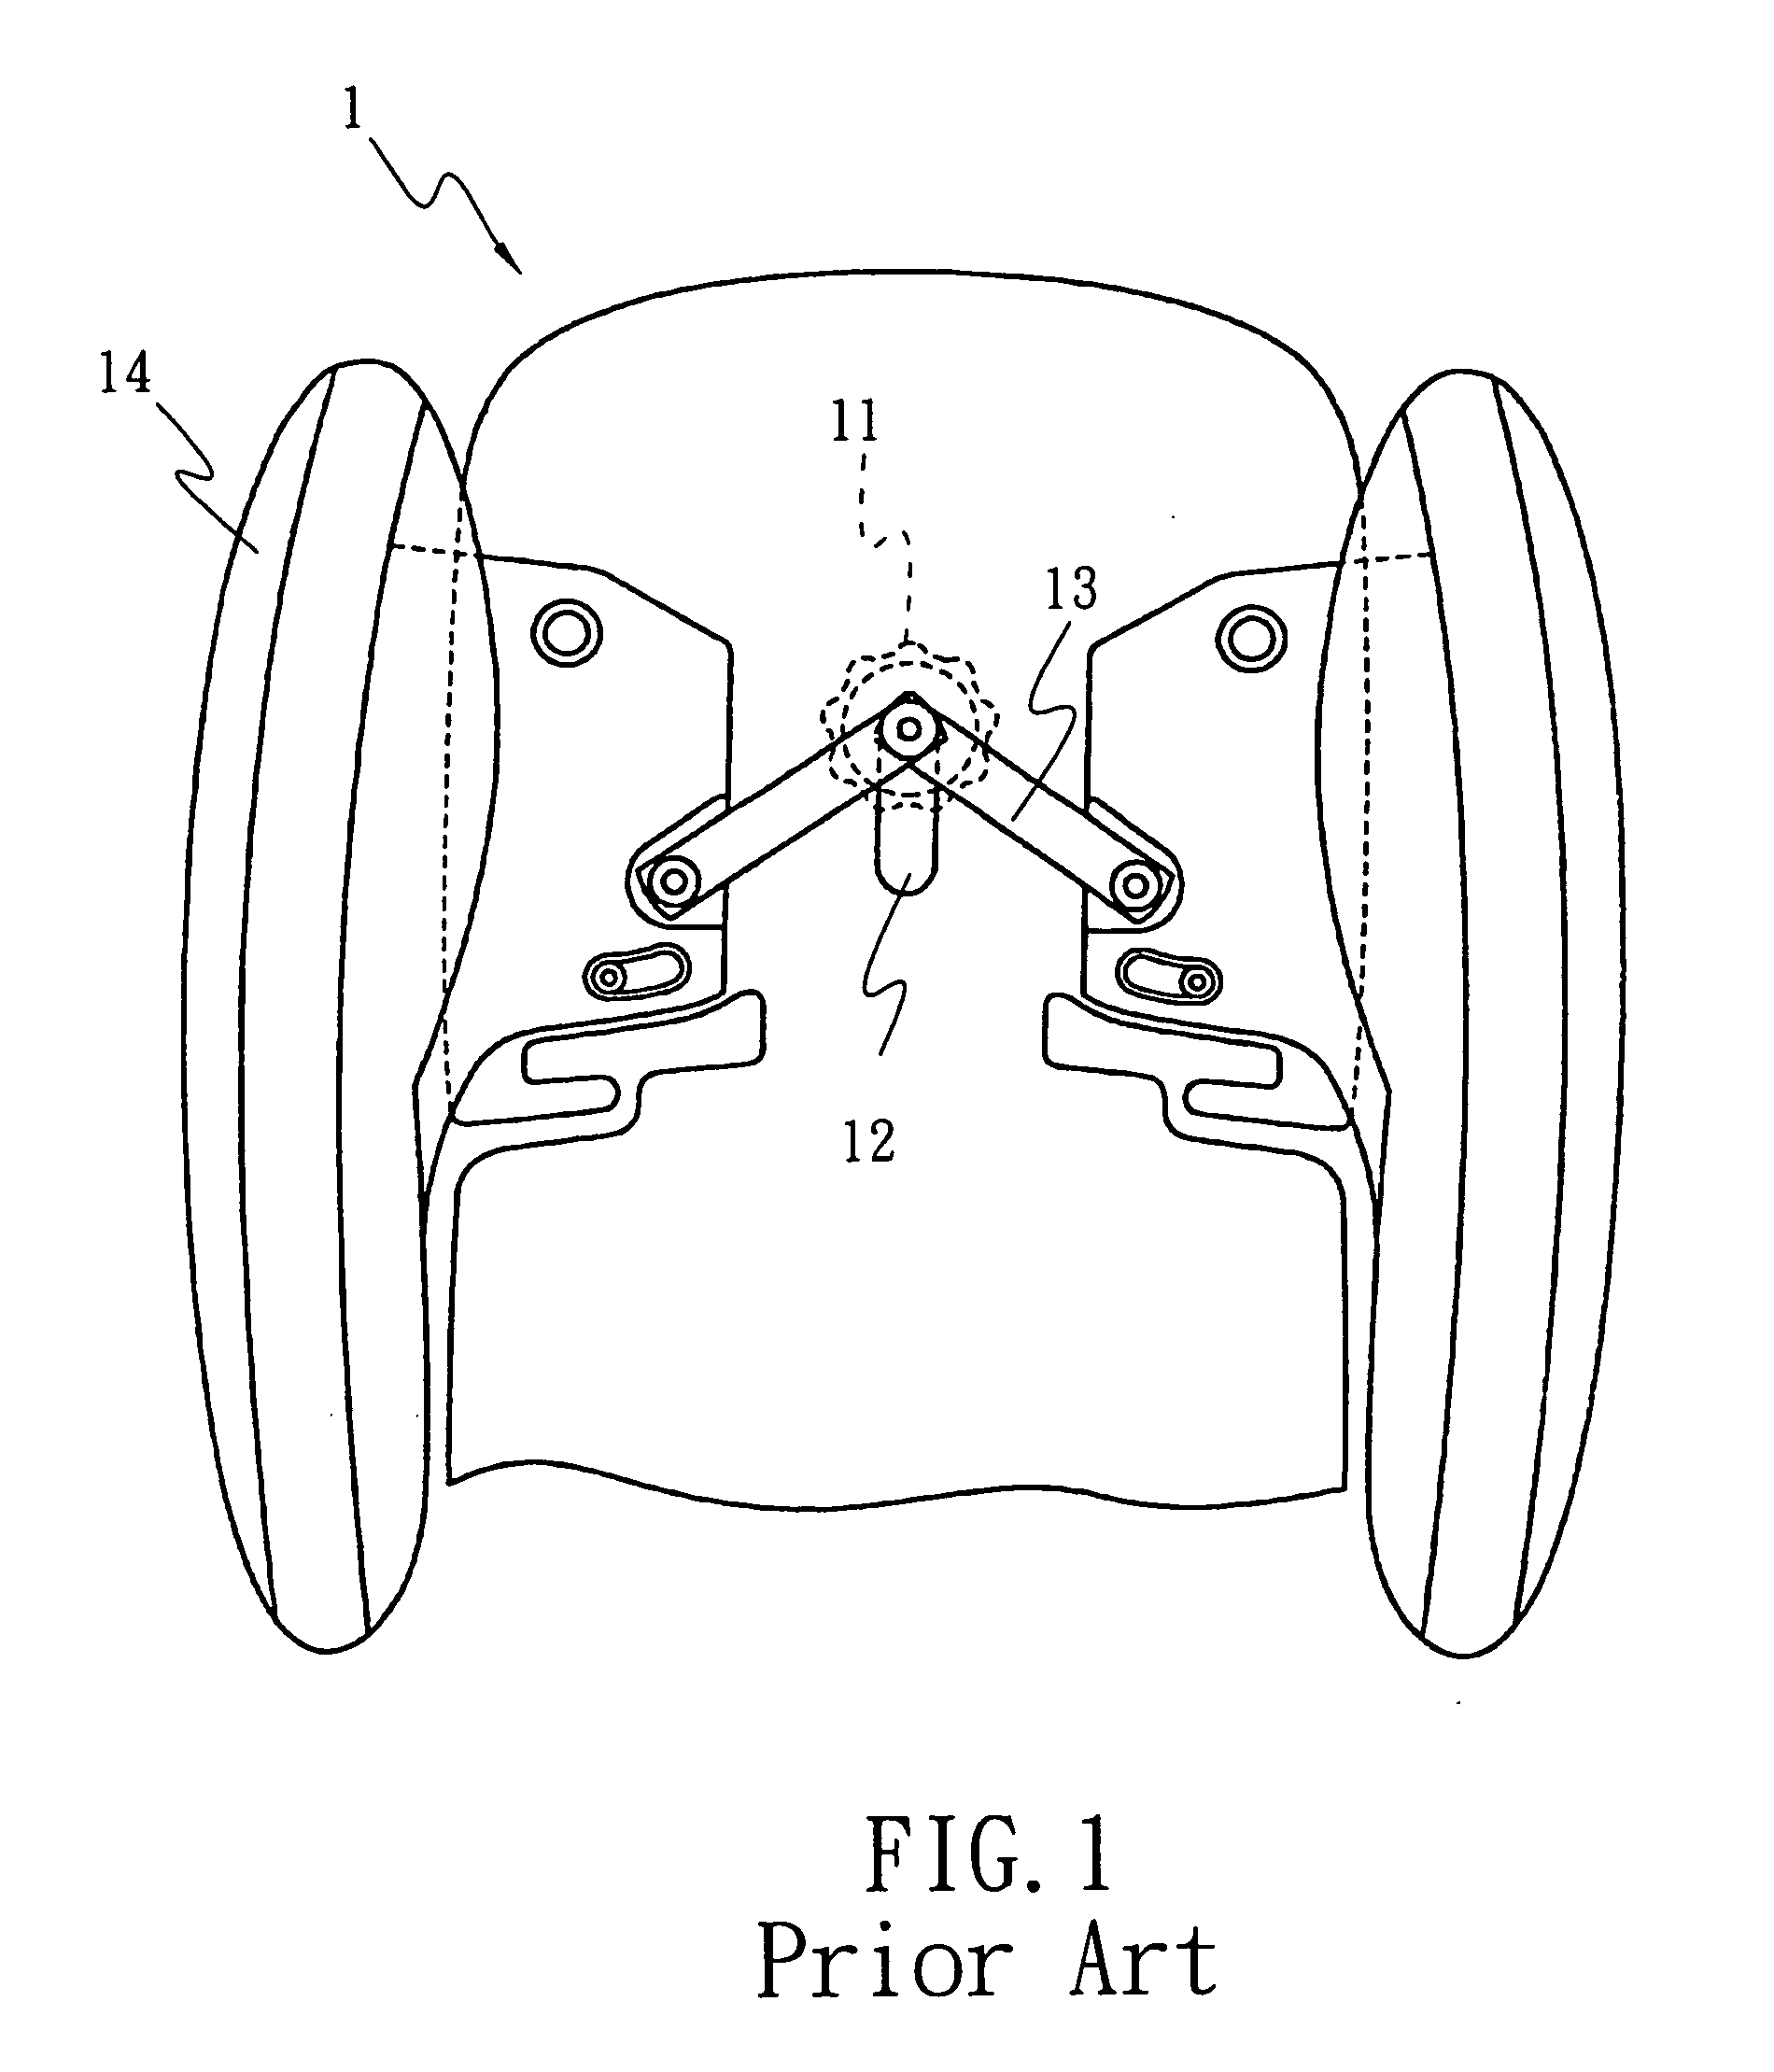 Child car seat device with wing components